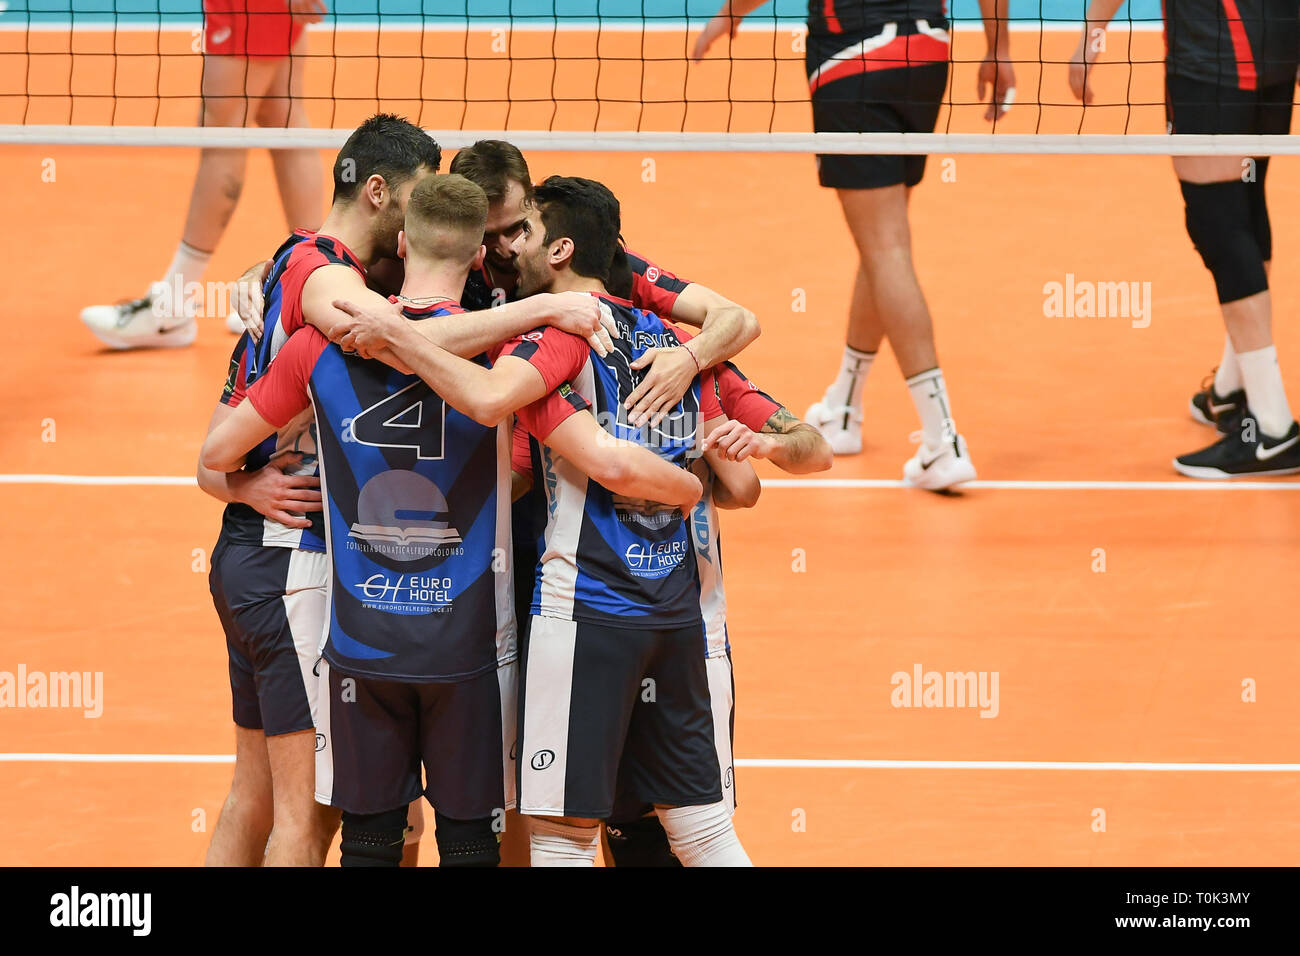 Candy Arena, Monza, Italy. 20th March, 2019. CEV Volleyball Challenge Cup  men, Final, 1st leg. Team Vero Volley Monza exultation during the match  between Vero Volley Monza and Belogorie Belgorod at the